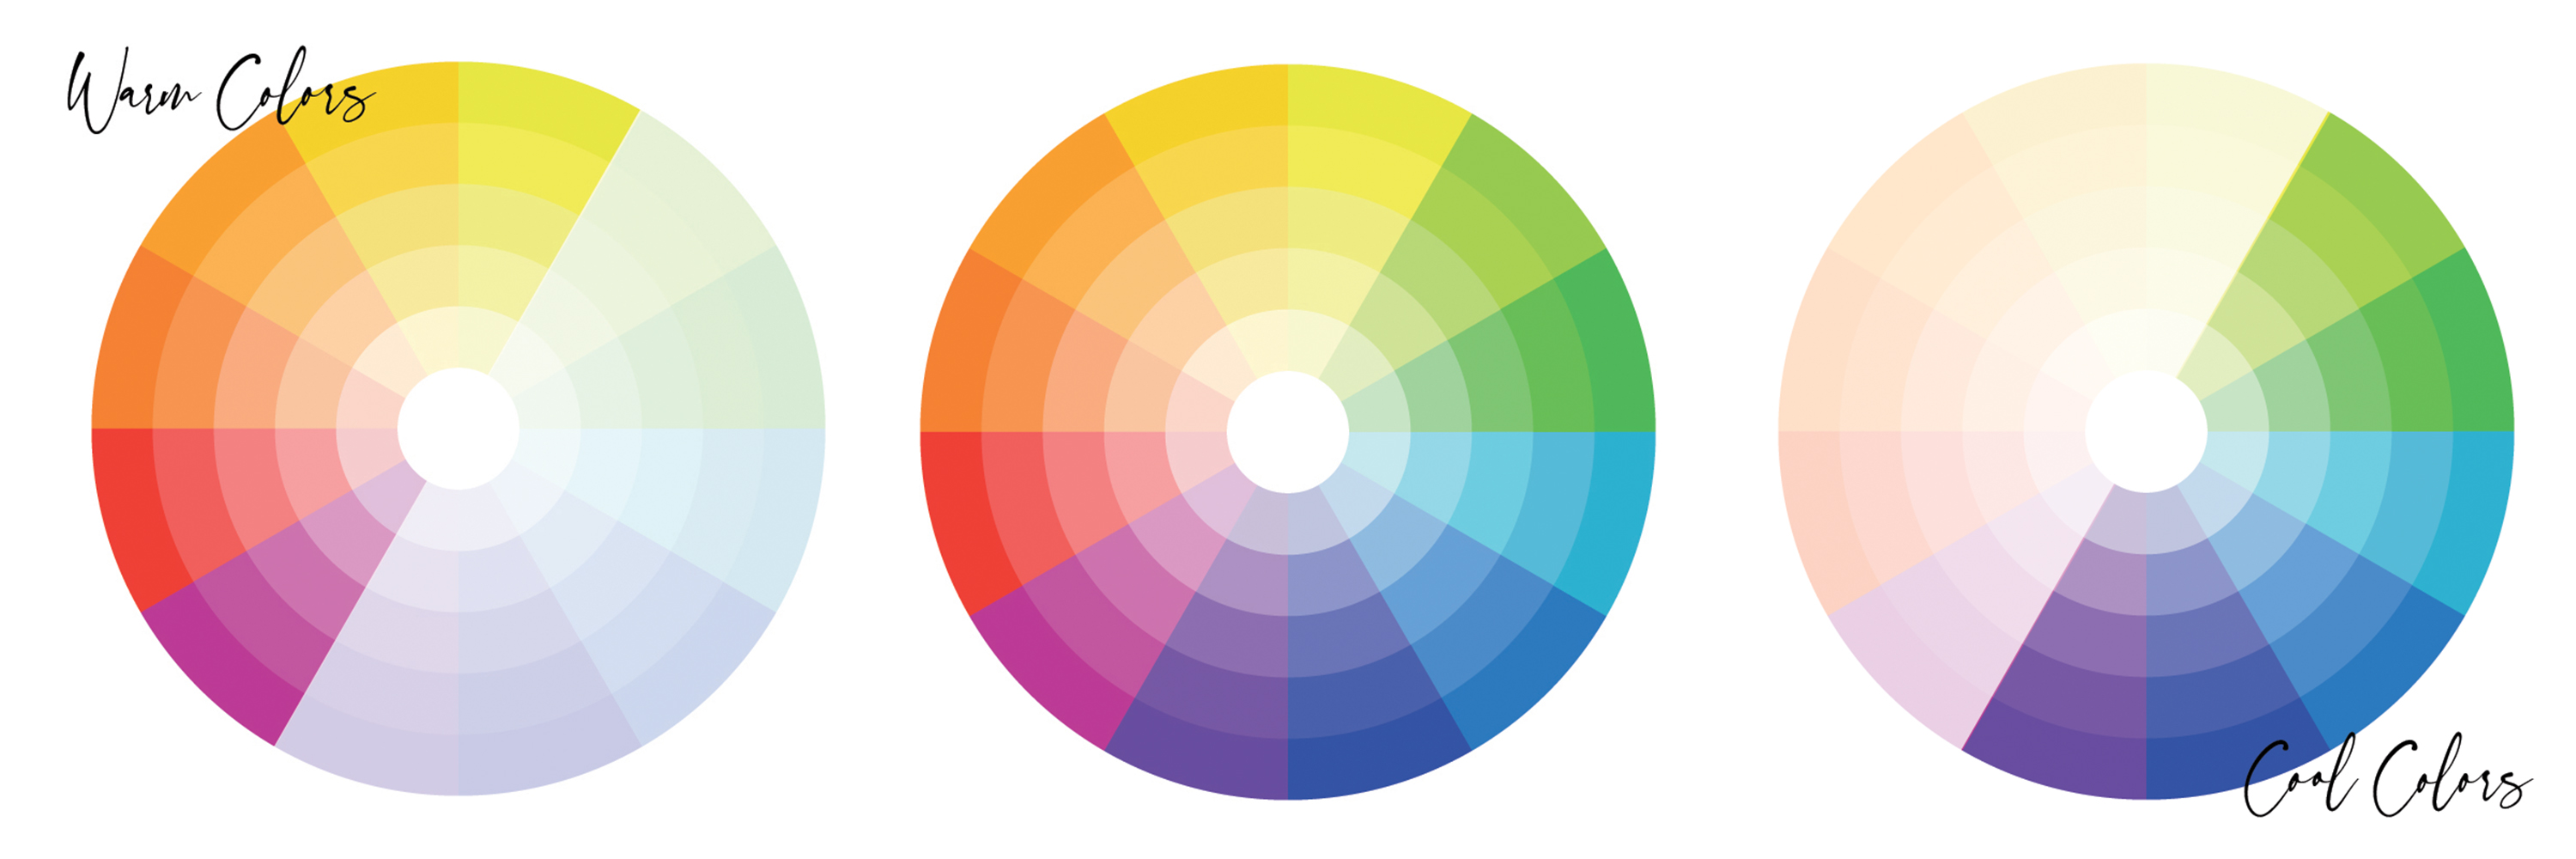 Choosing colors for photos